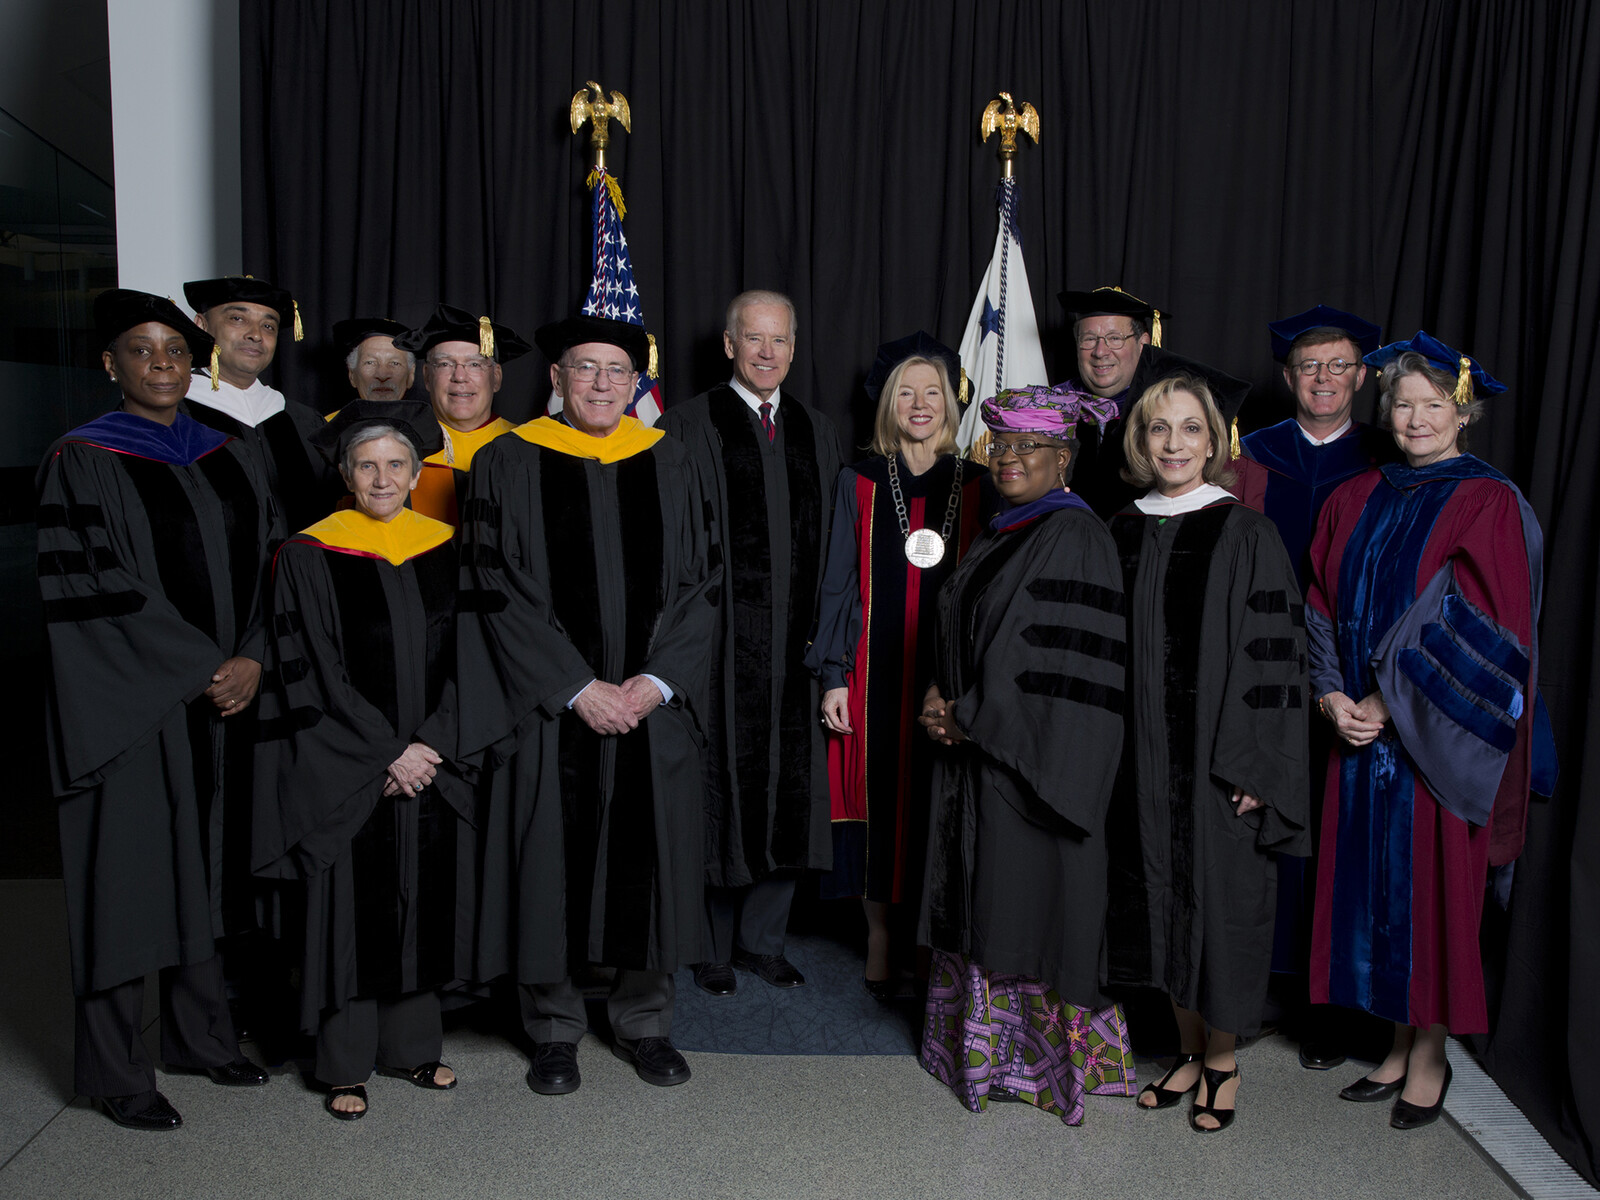 Amy Gutmann and 2013 Penn honorary degree recipients in regalia